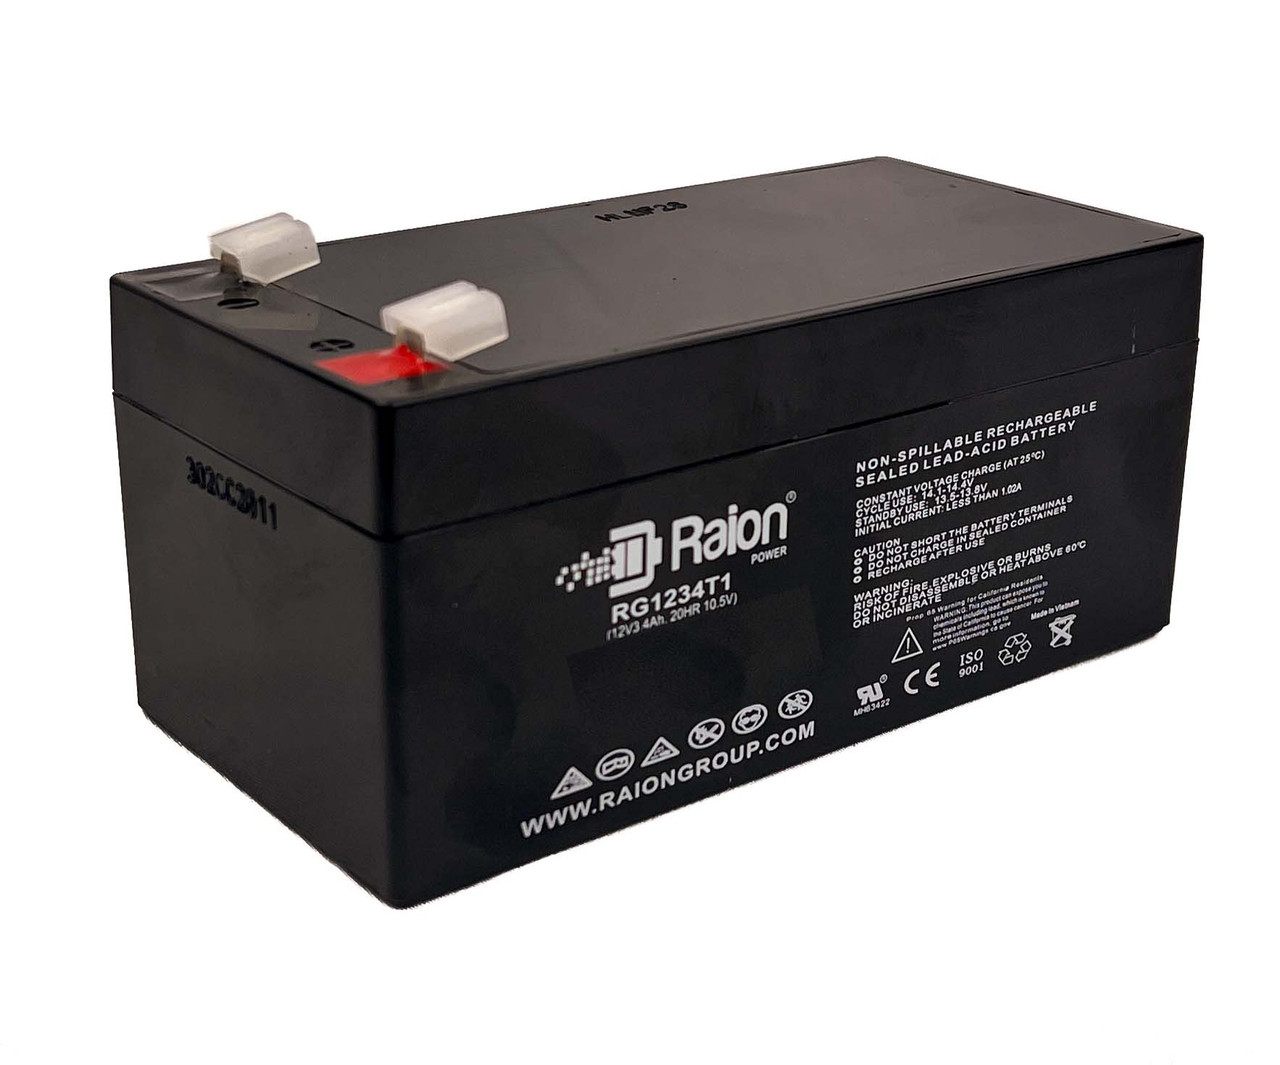 Raion Power 12V 3.4Ah Non-Spillable Replacement Battery for FirstPower FP1232